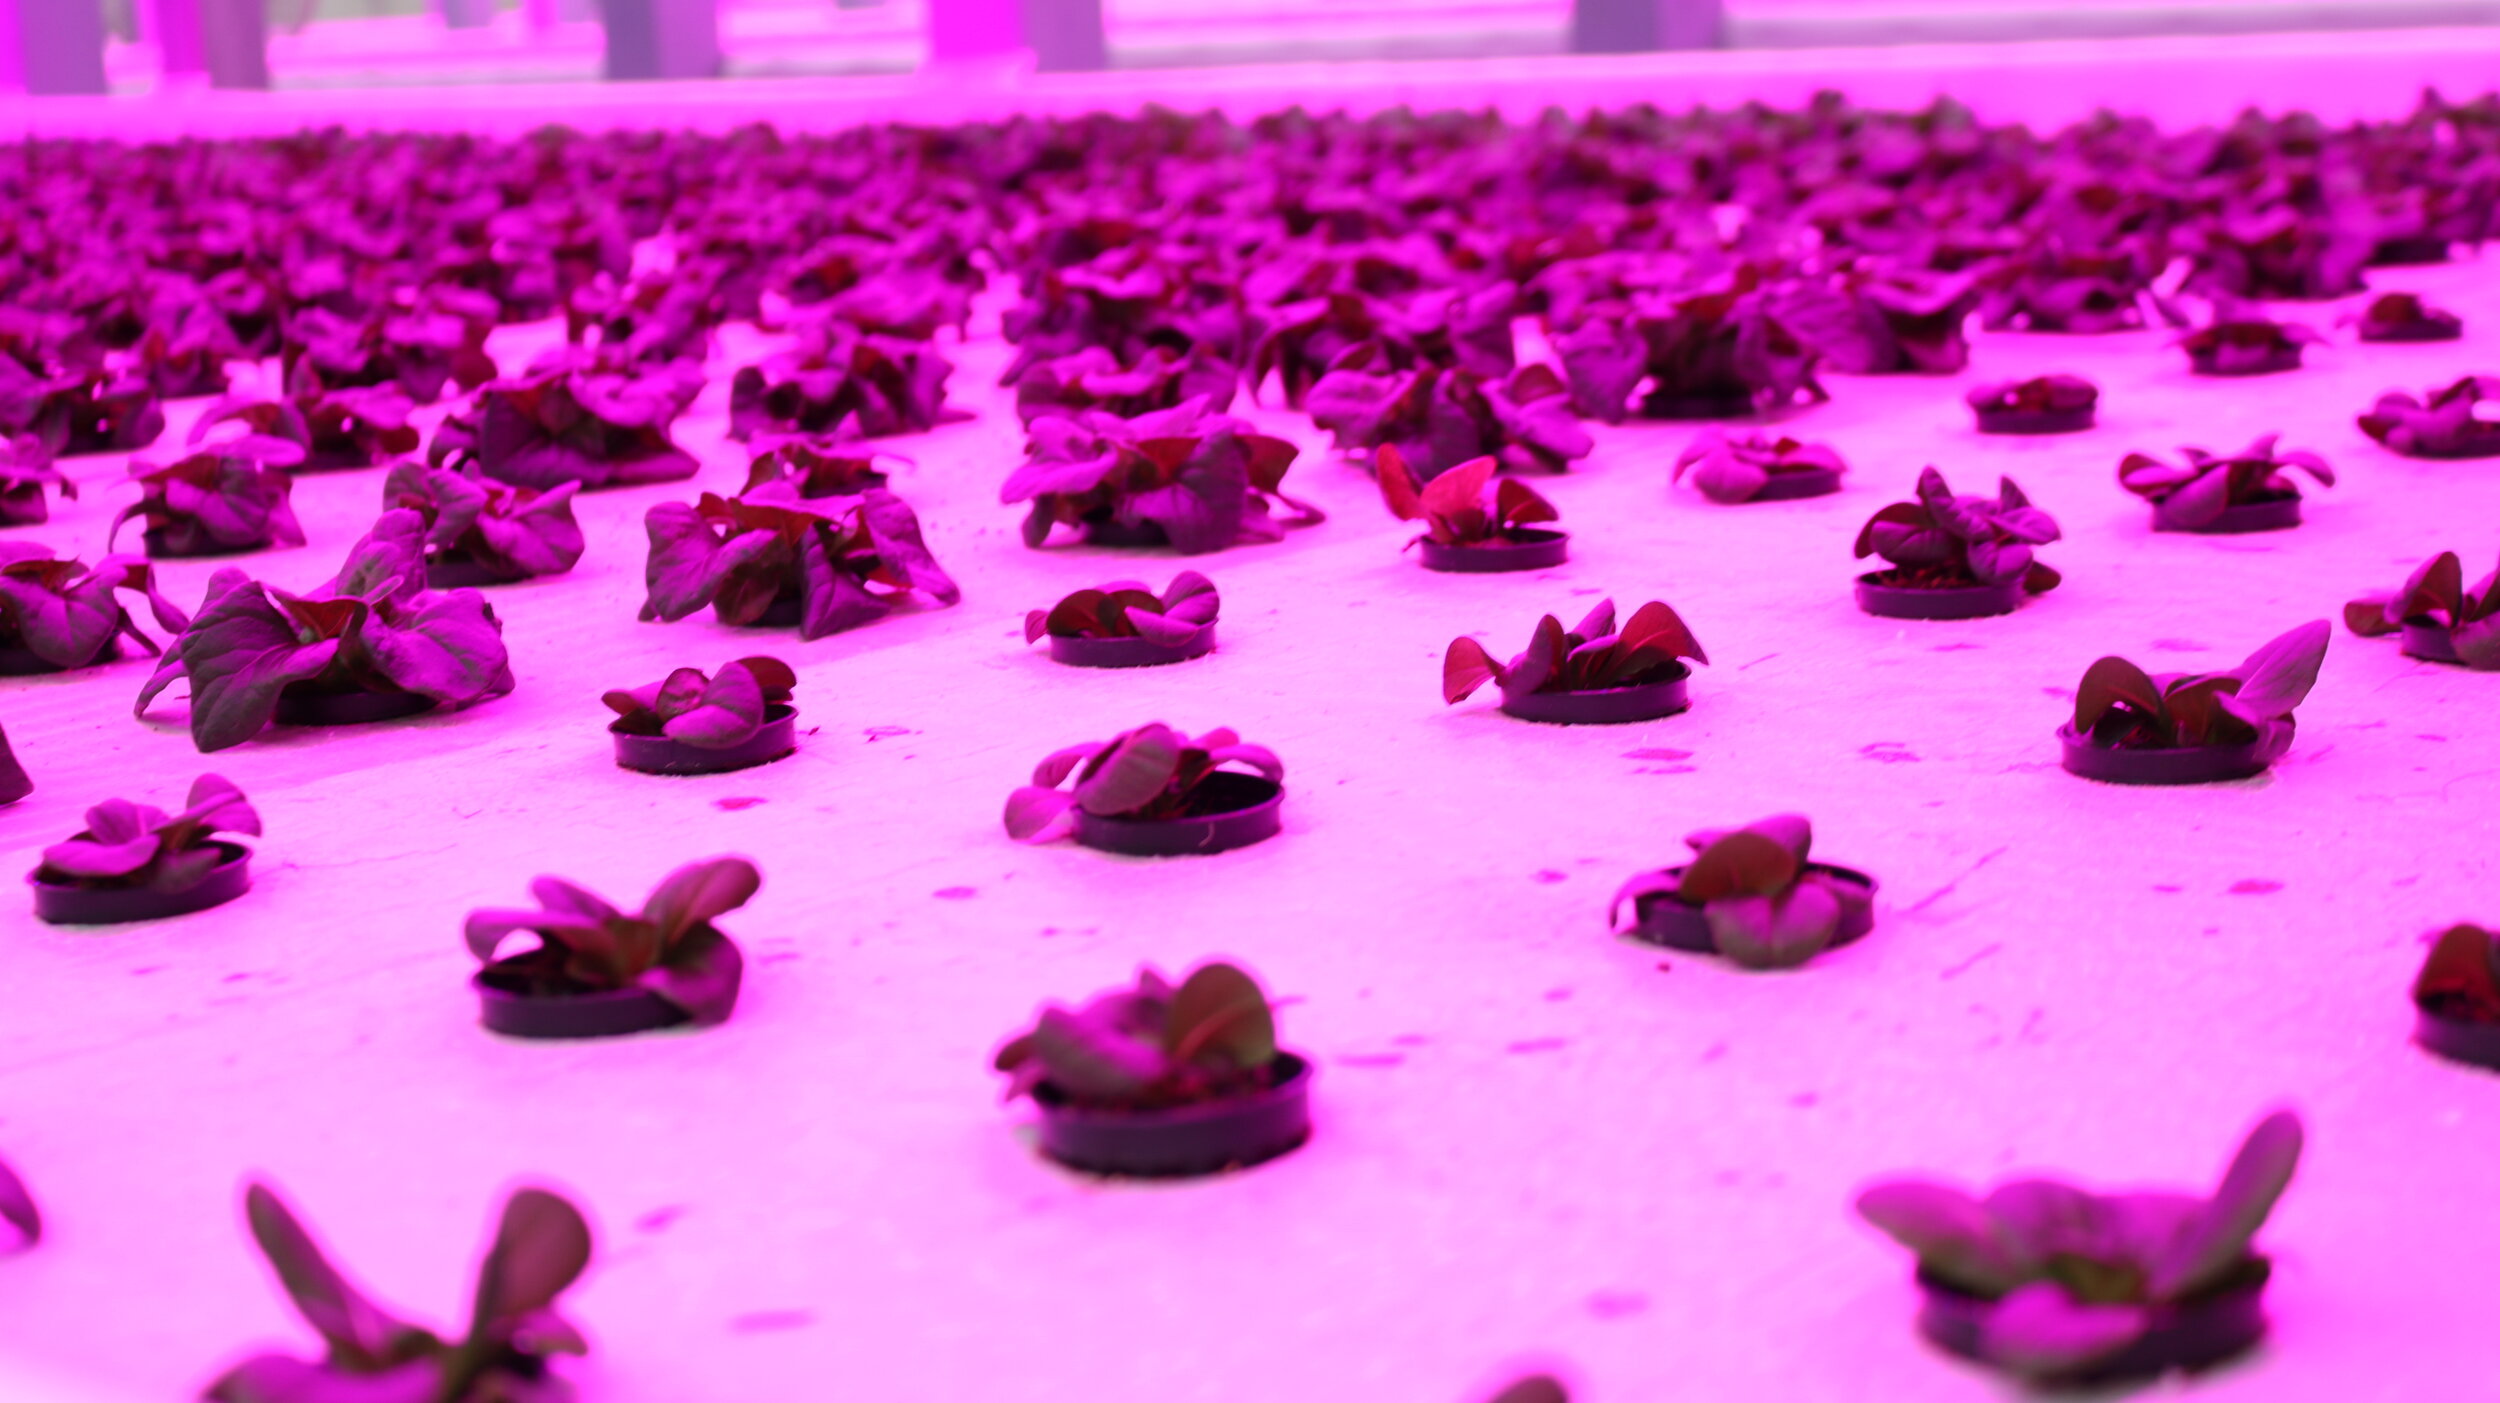  Produce such as lettuce and spinach are grown in the aquaponics system. Photo by Ebony Ellis.  